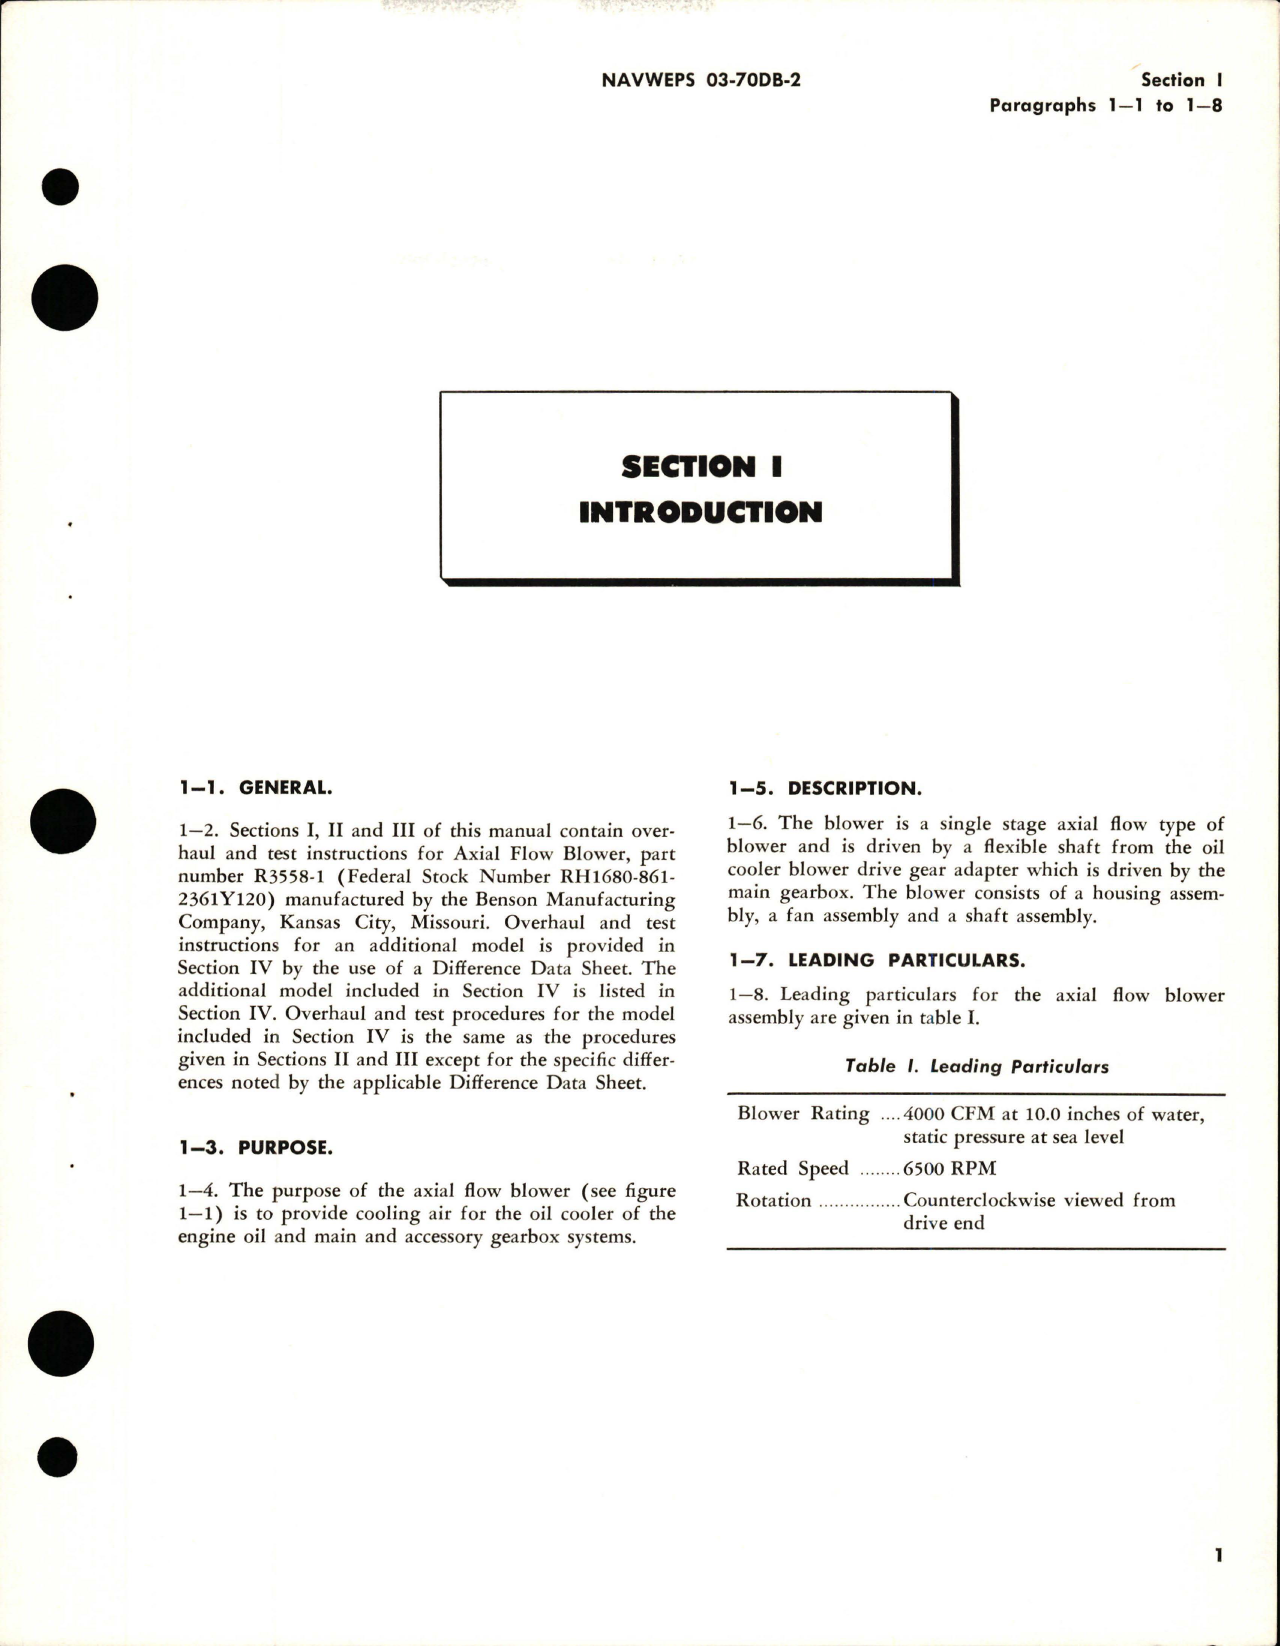 Sample page 5 from AirCorps Library document: Overhaul Instructions for Axial Flow Blower and Oil Cooler Blower Assembly - Parts R3558-1 and K677012-1 